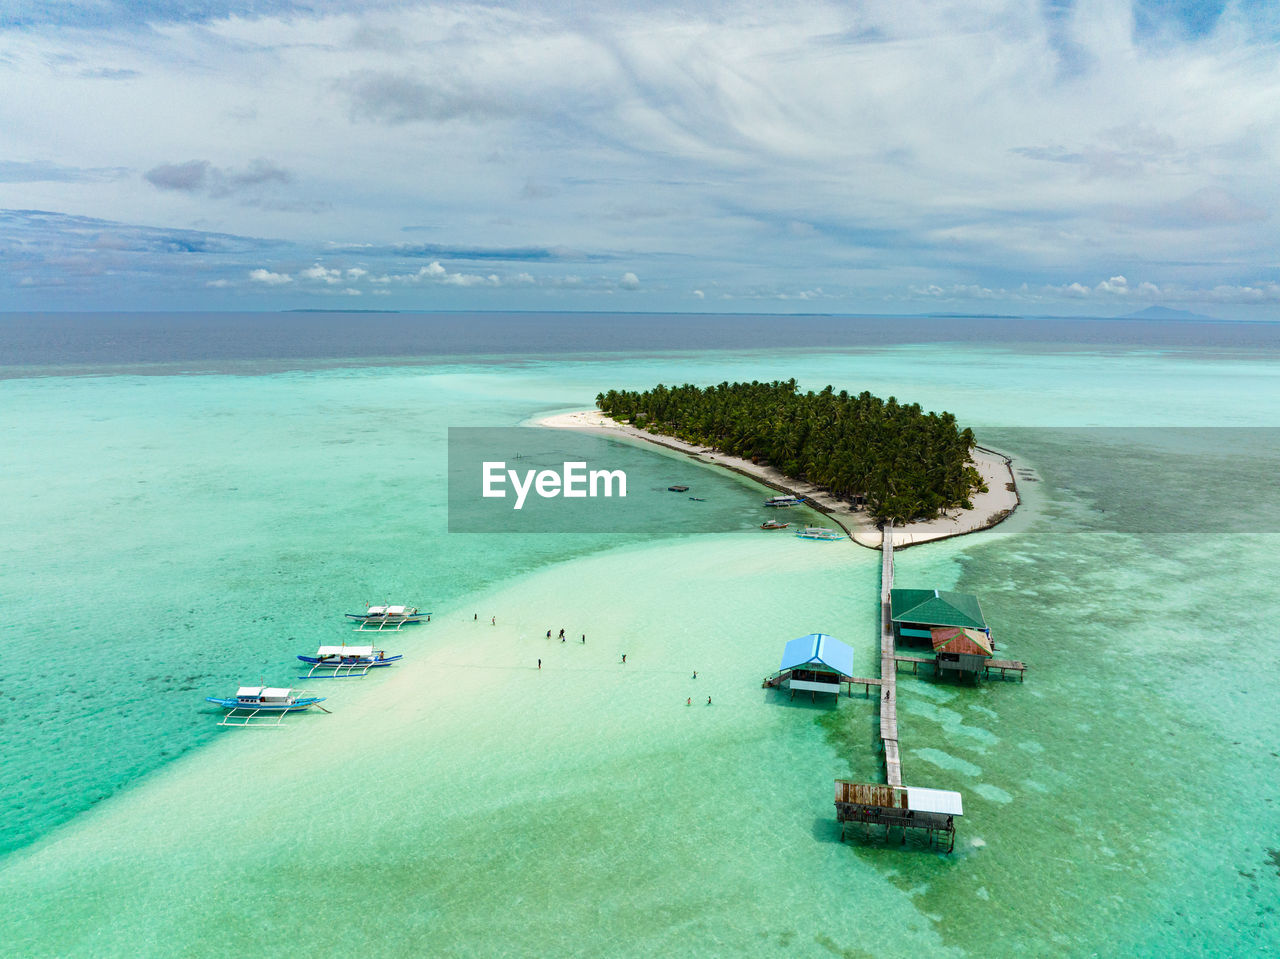 Aerial view of tropical island on an atoll with a beautiful beach. onok island, balabac, philippines